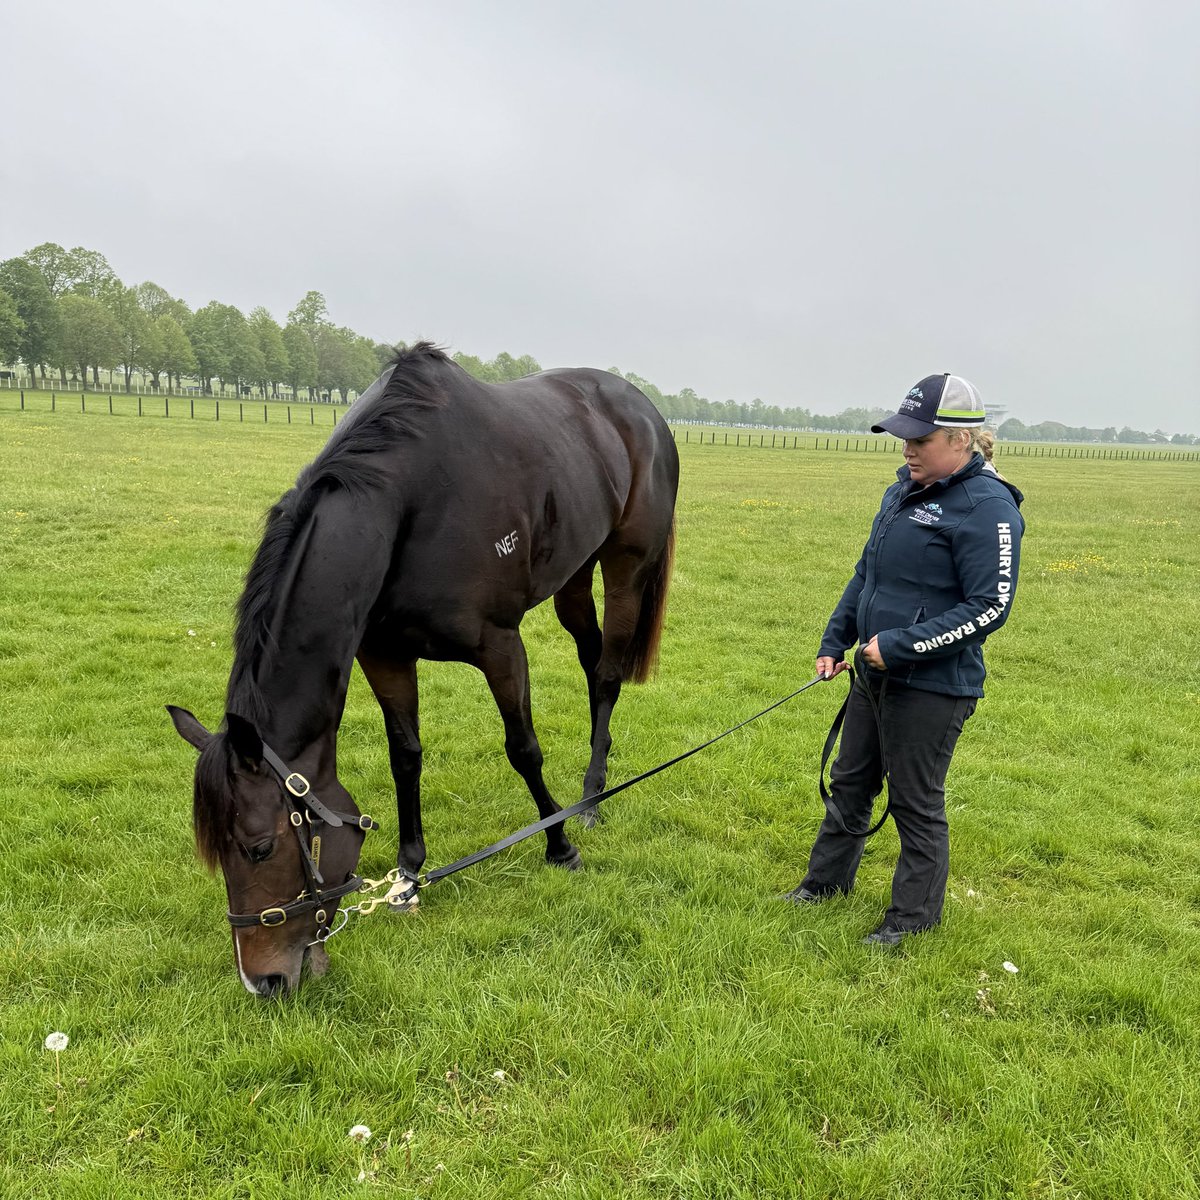 Australian sprinter ASFOORA and her travelling person Chenelle have settled in nicely with @almracing in Newmarket for @HDwyerRacing. 🇦🇺✈️🇬🇧 The mare has been entered in Gr.1 King Charles III Stakes at Royal Ascot. 👑